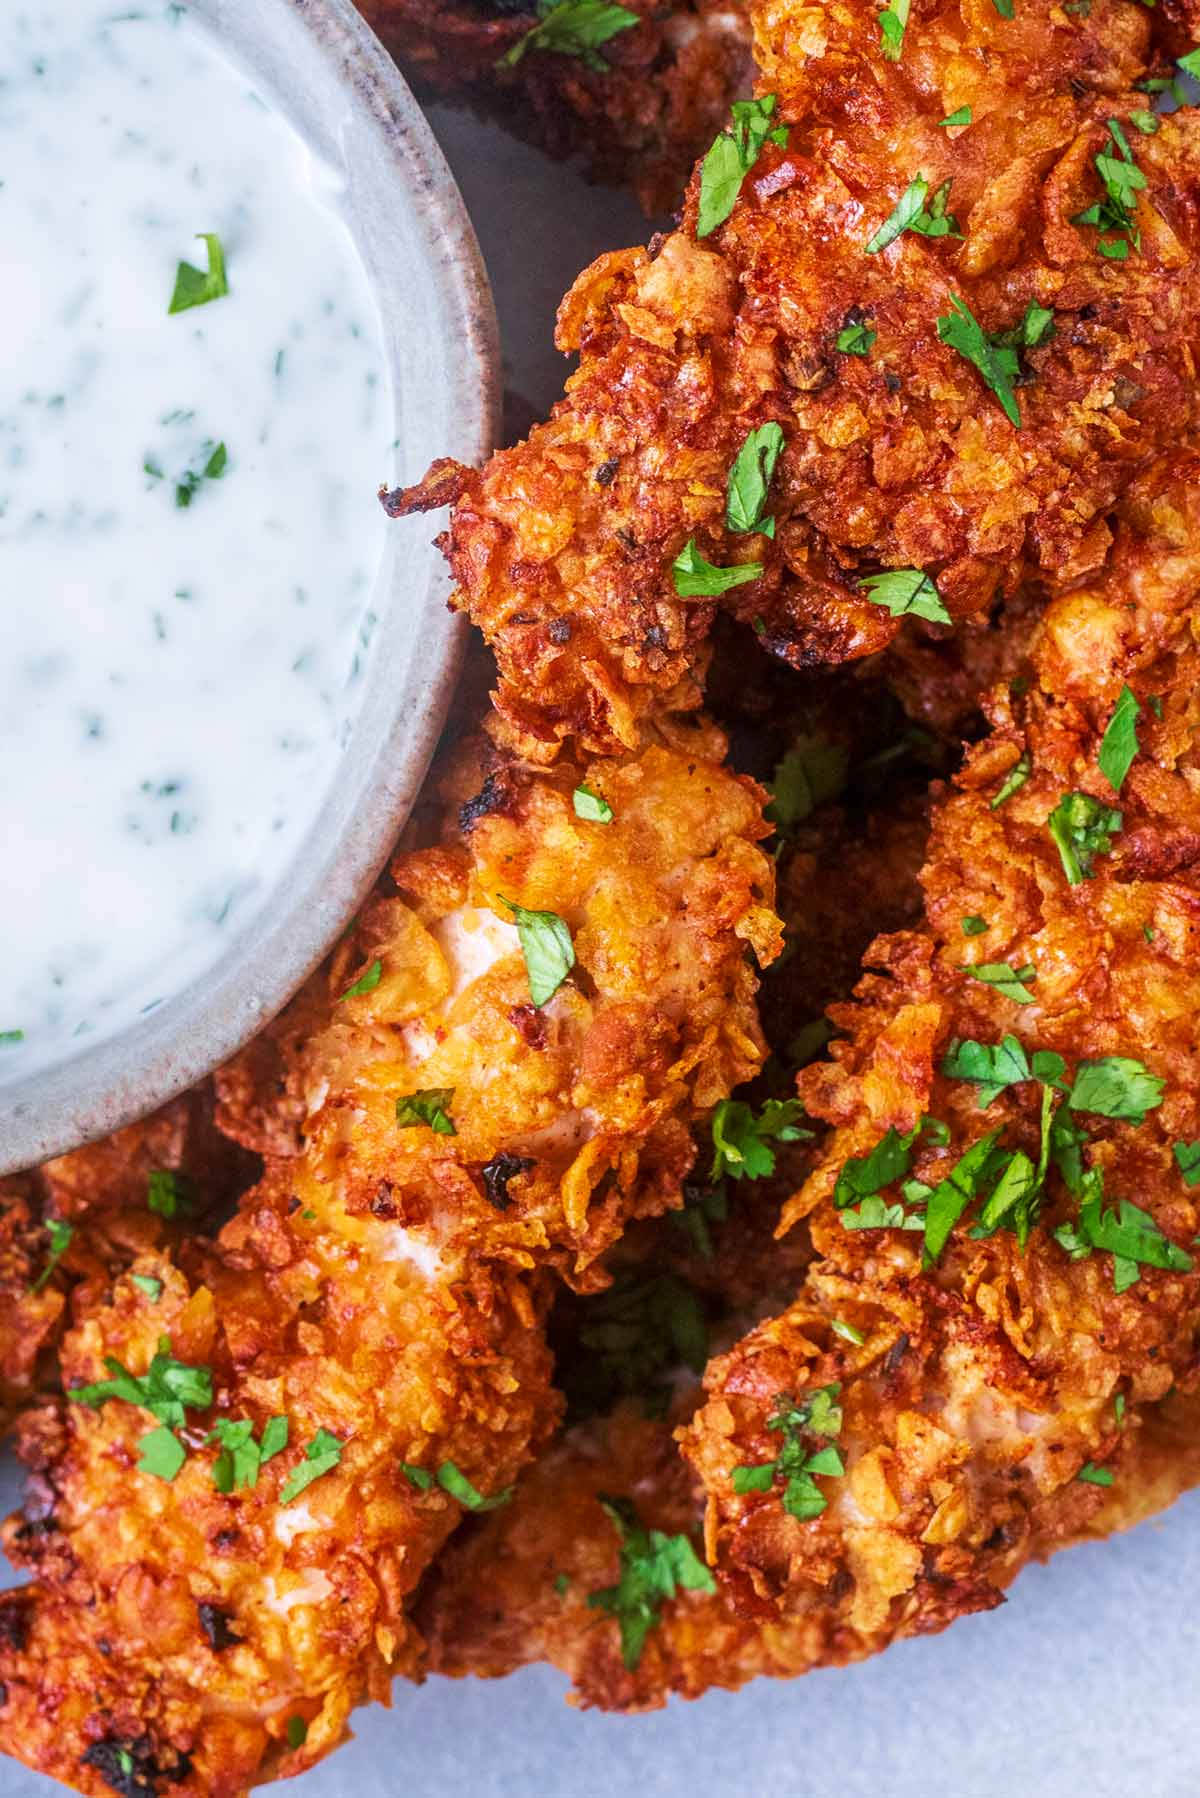 Cornflake coated chicken tenders with chopped herbs sprinkled over them.